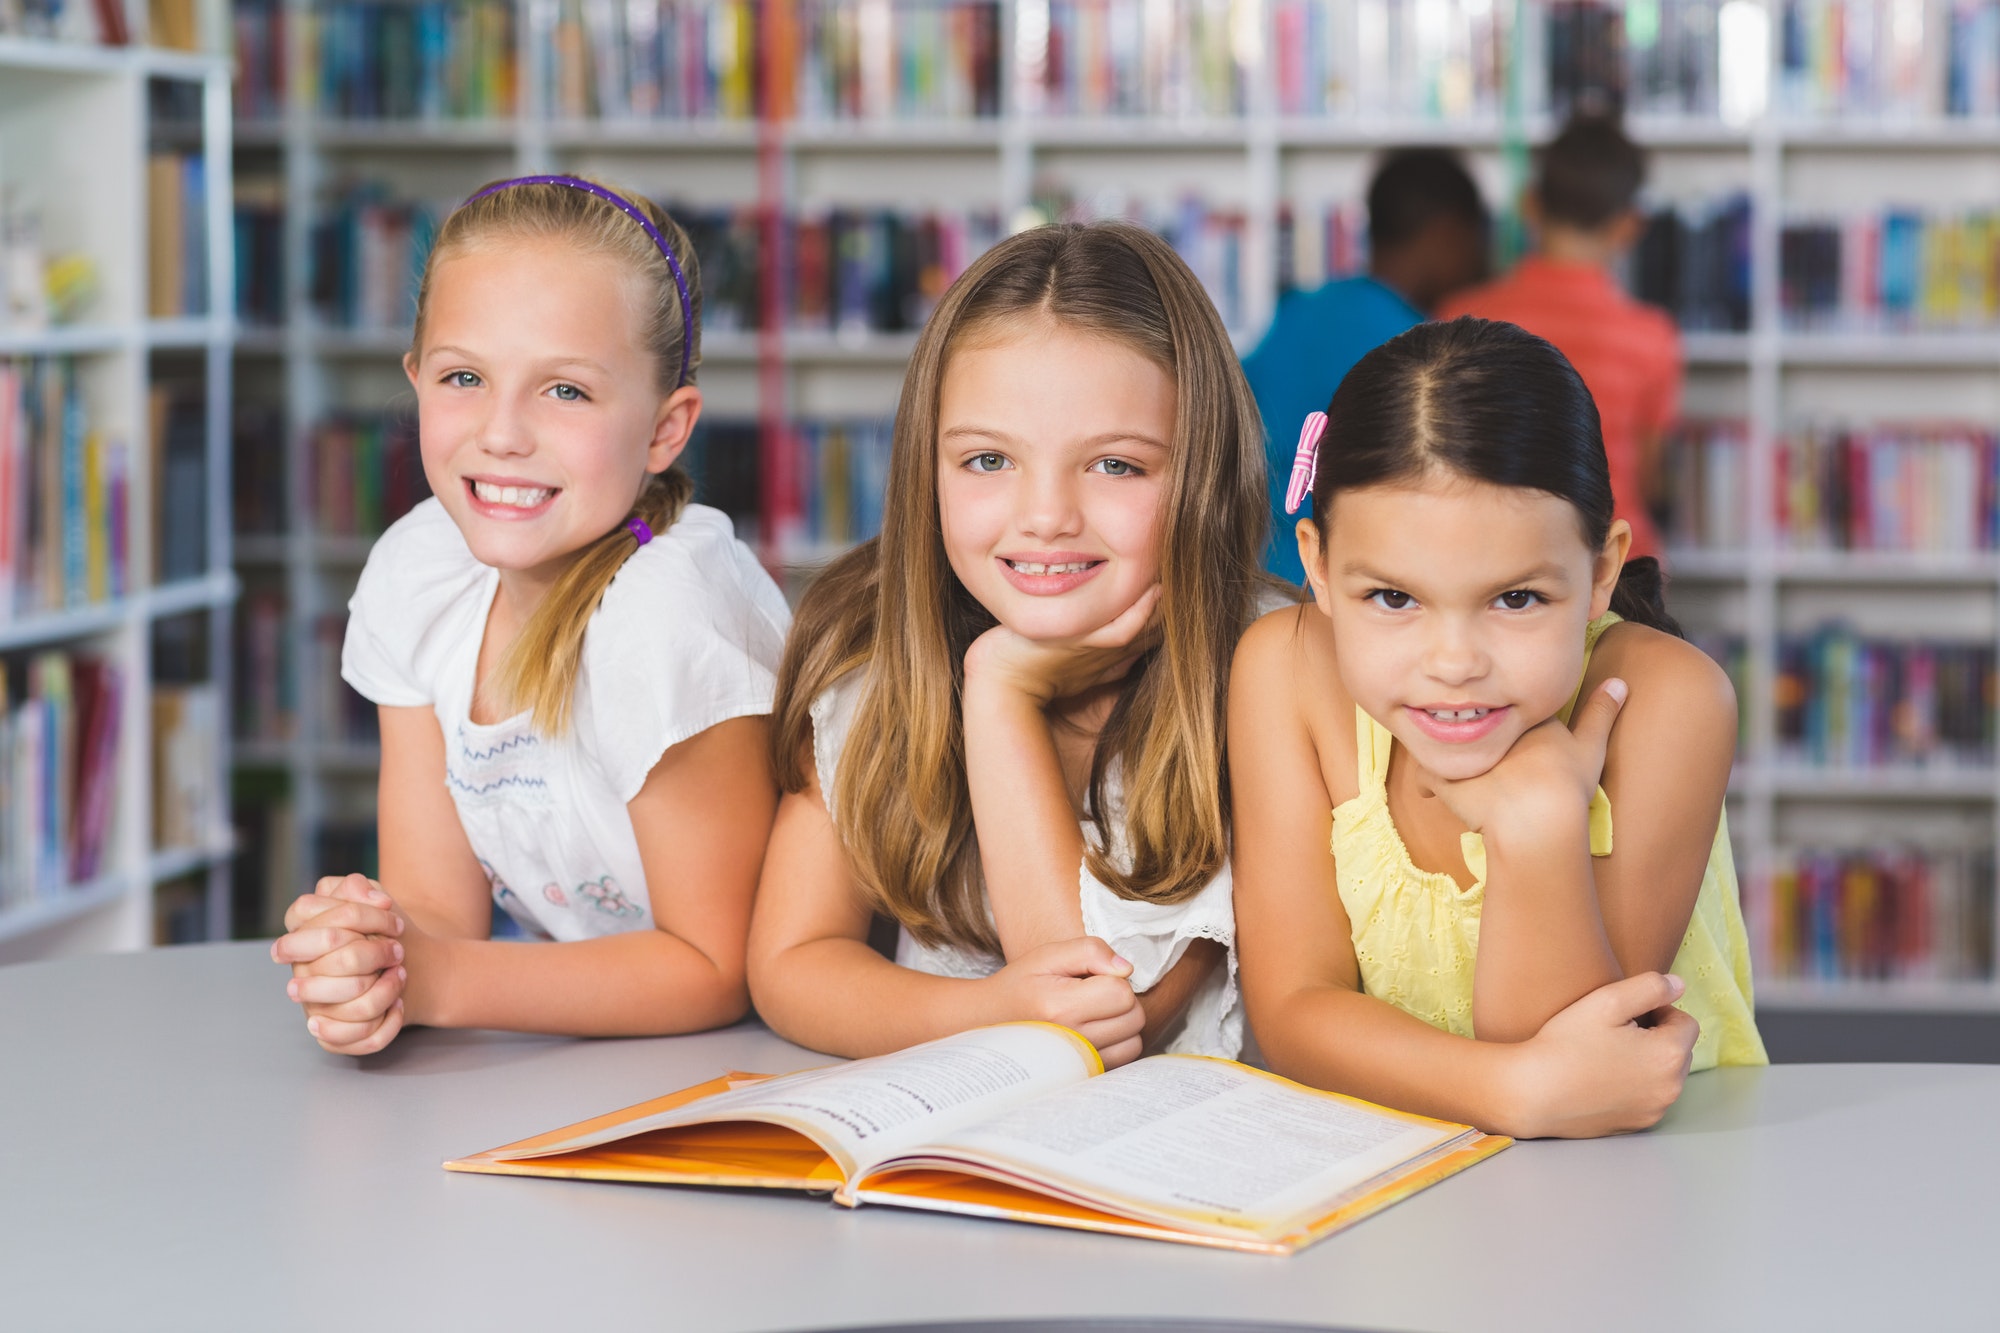 School kids reading book together in library